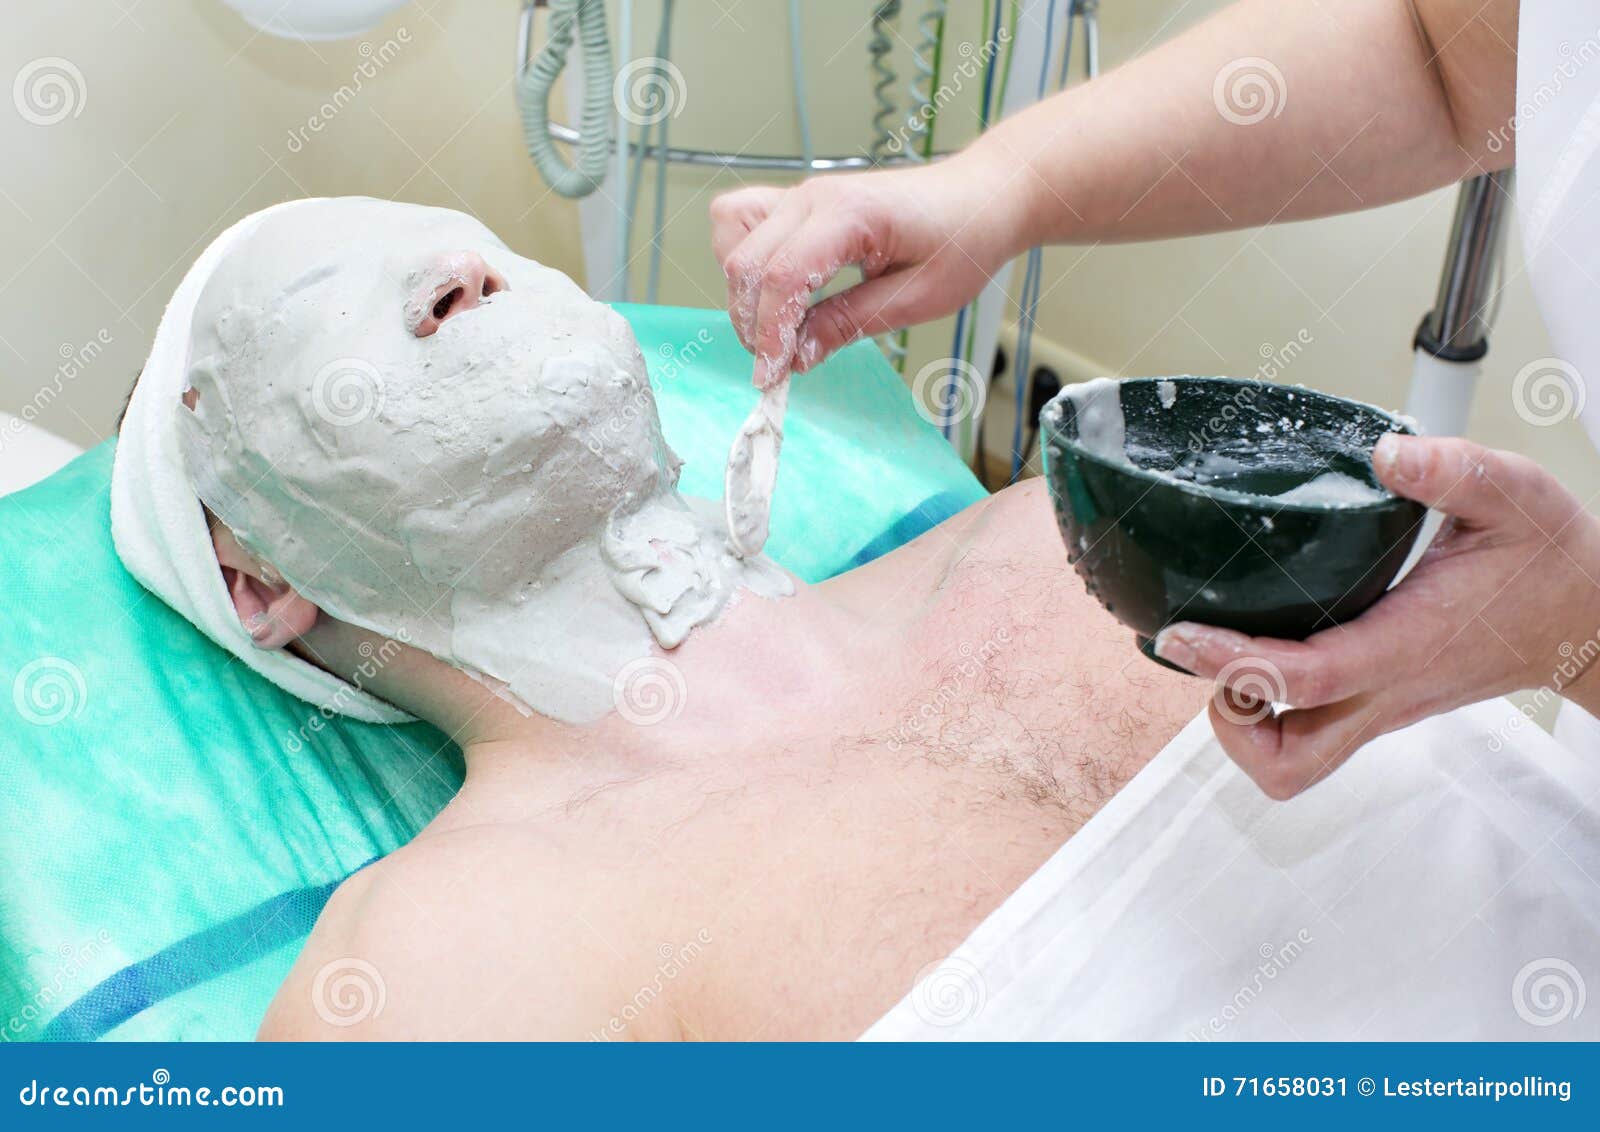 Process Of Massage And Facials Stock Image Image Of Body Care 71658031